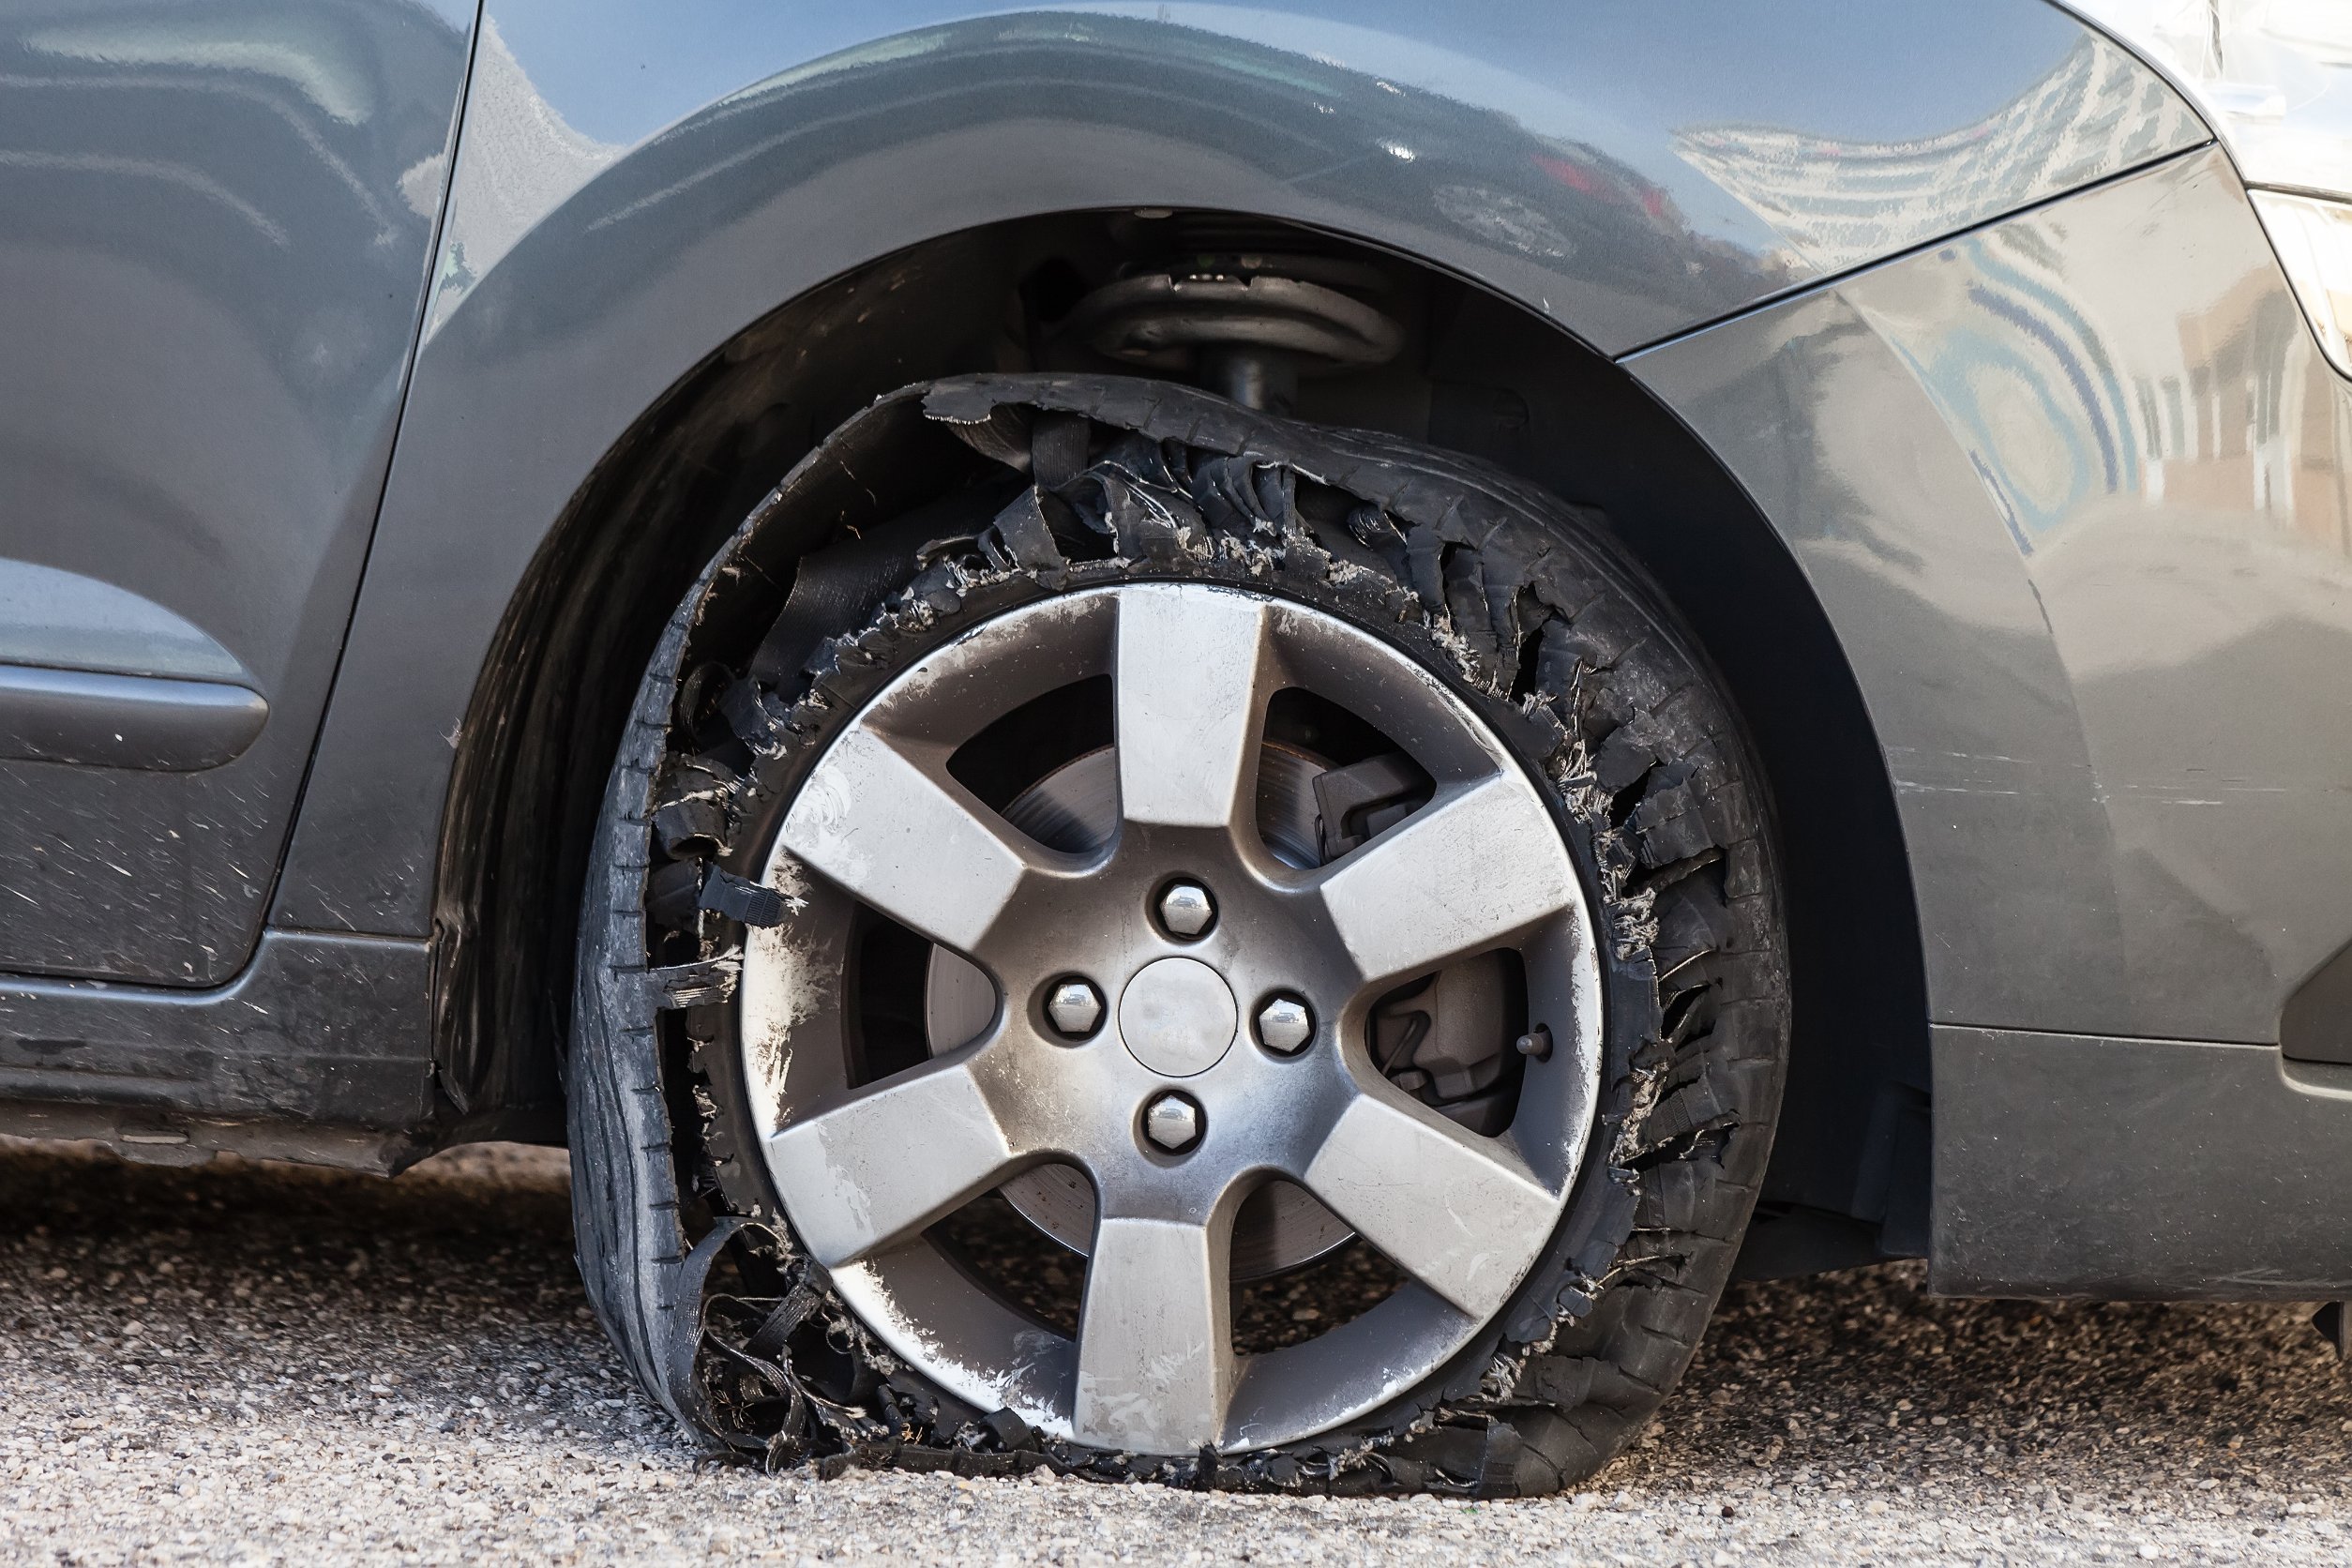 Three Warning Signs of Tire Failure to Watch For